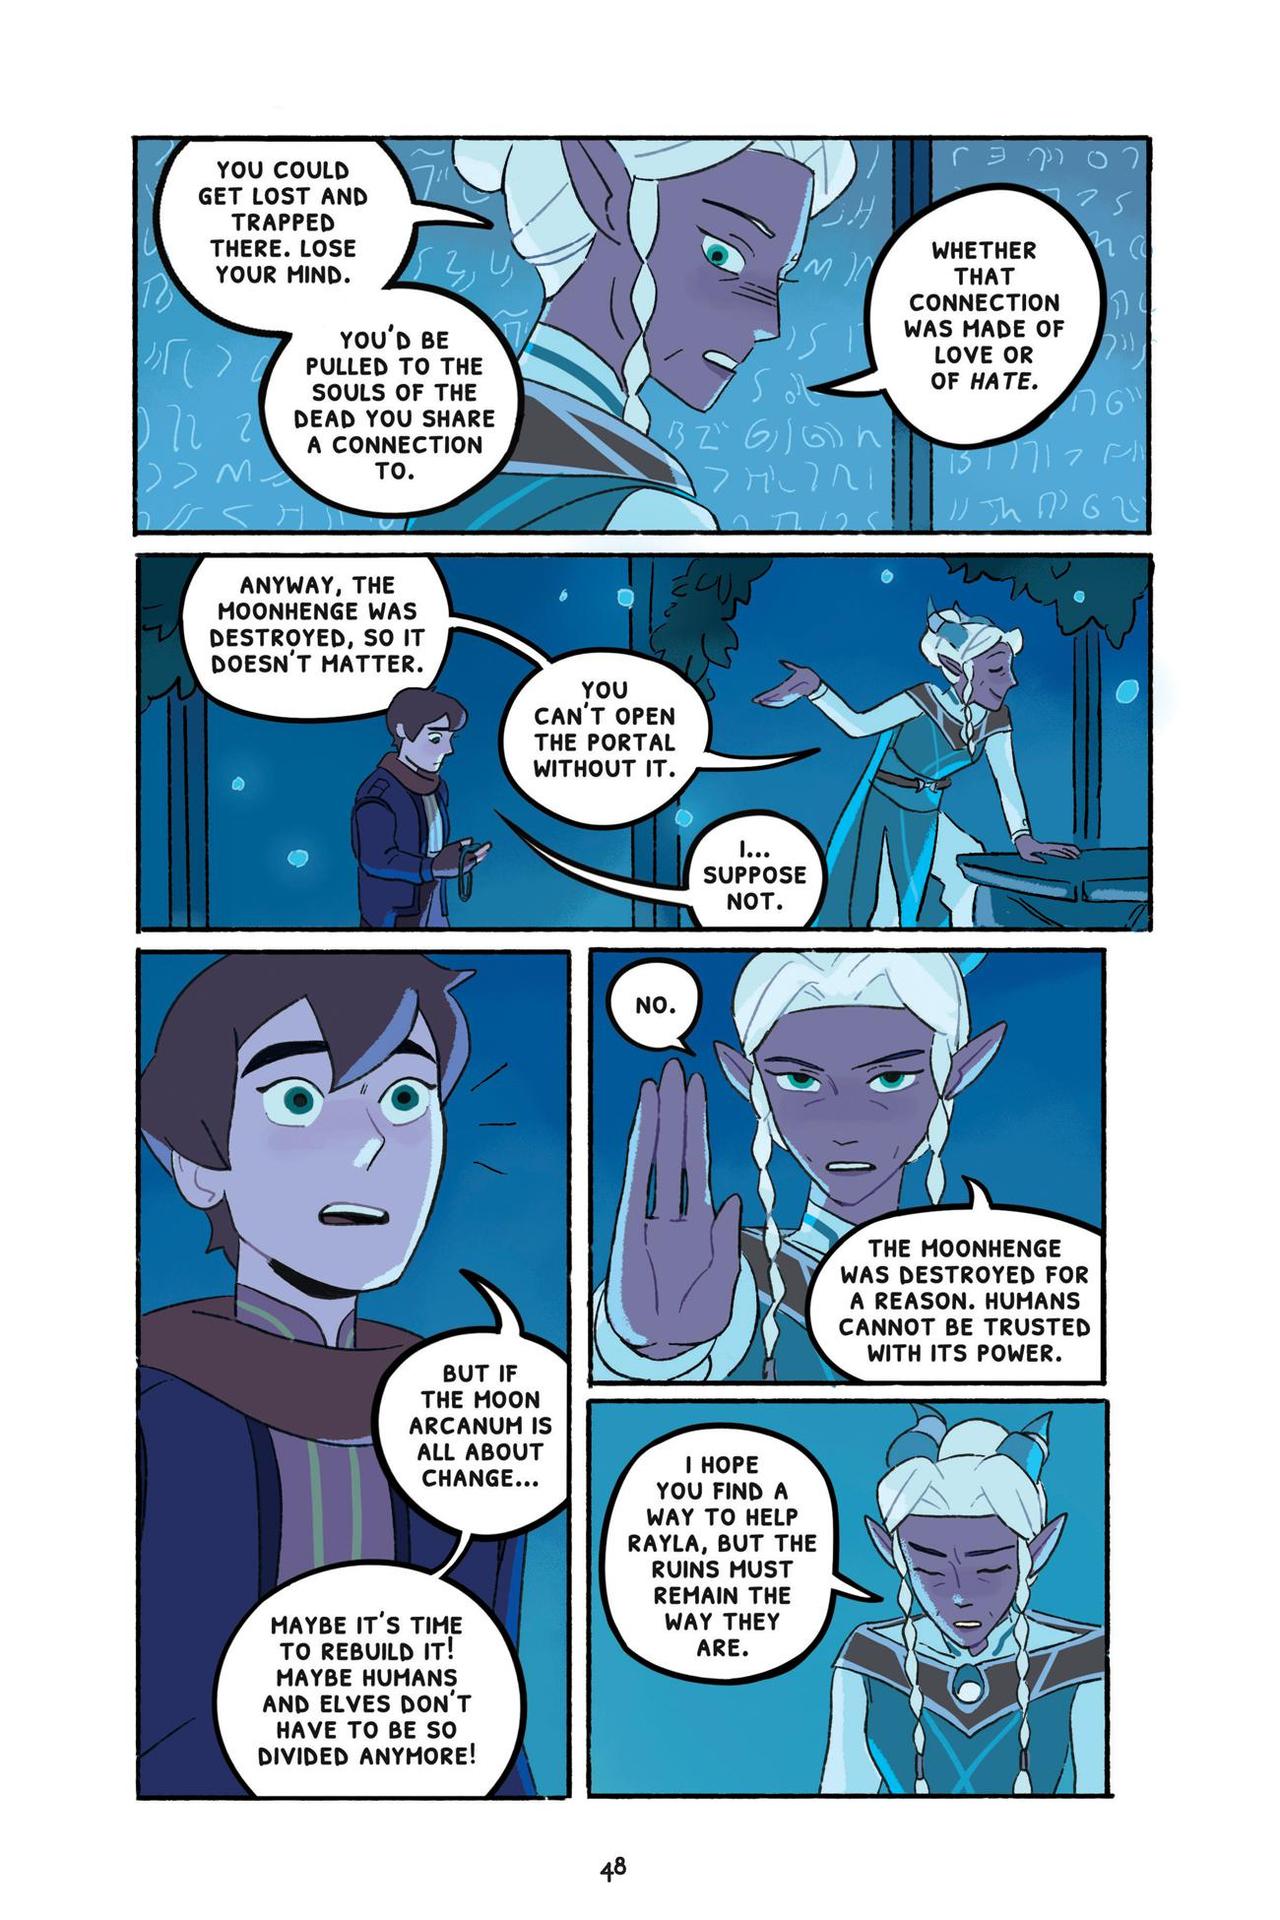 Through the Moon: The Dragon Prince Graphic Novel (2020) Chapter 1 - Page 52